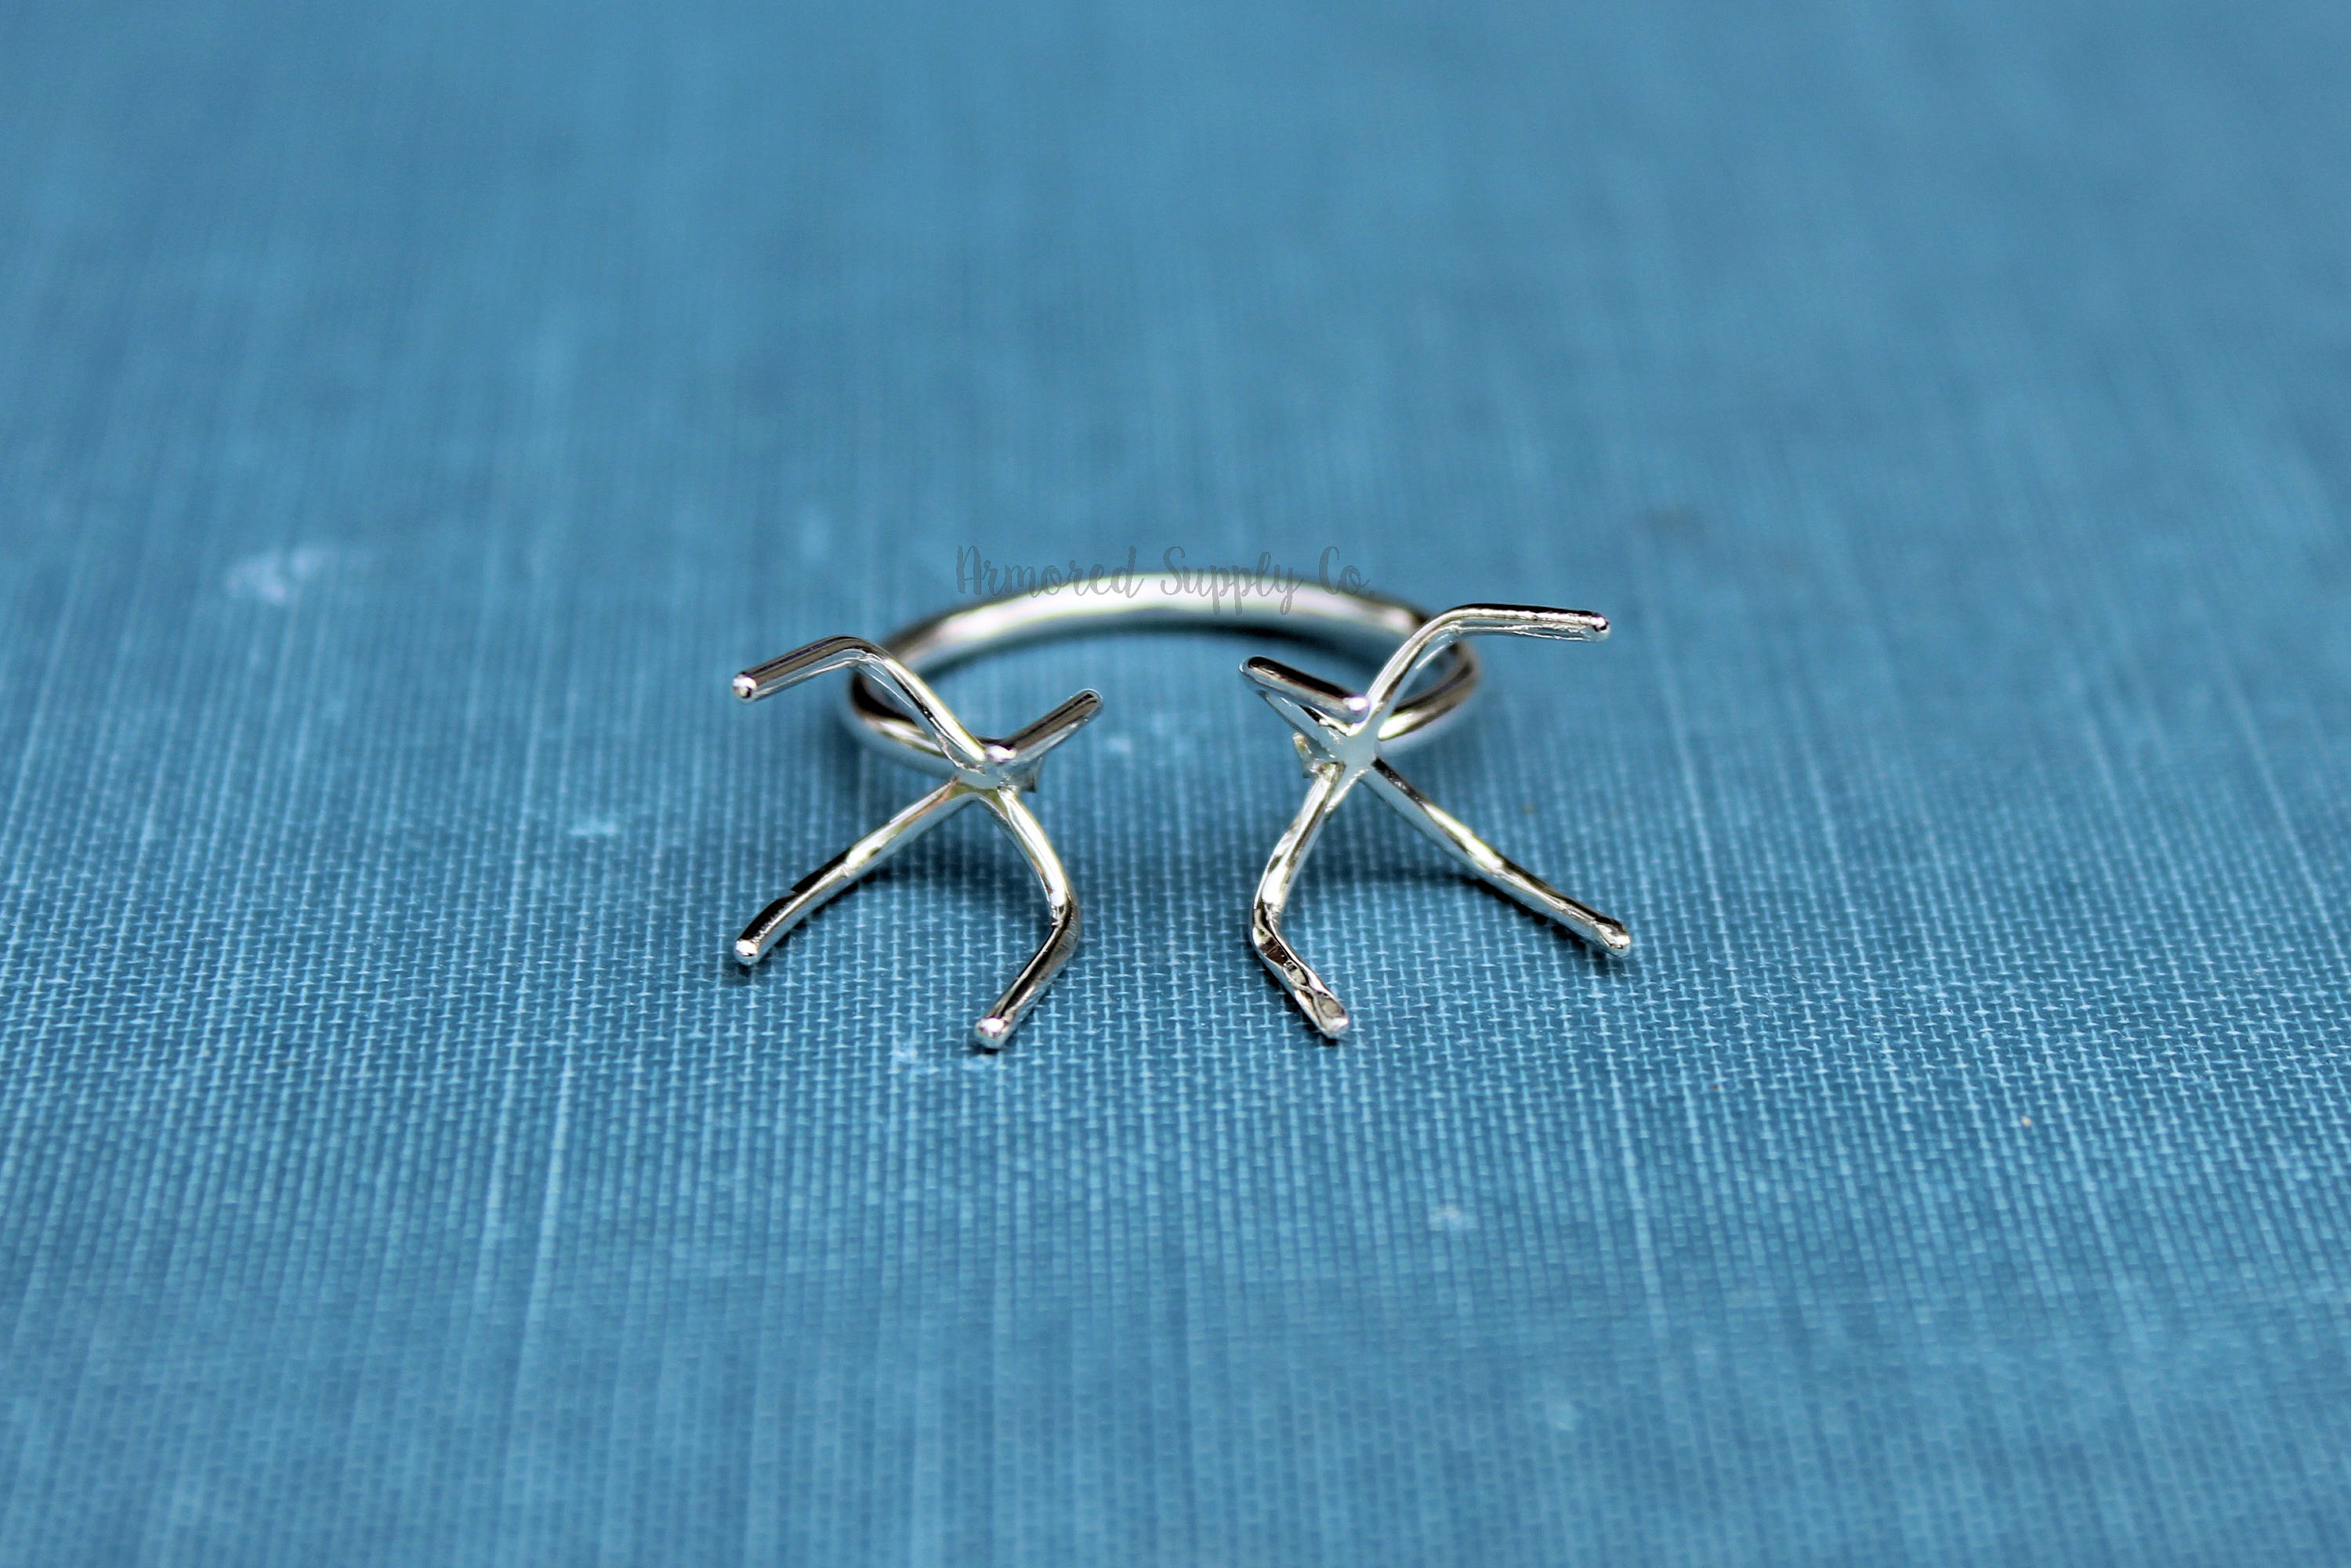 Claw Prong Ring Blank, Adjustable Open Ring Band, Double Claw Prong Silver Ring Blank, Wholesale Silver Ring, DIY Jewelry, Jewelry Supplies